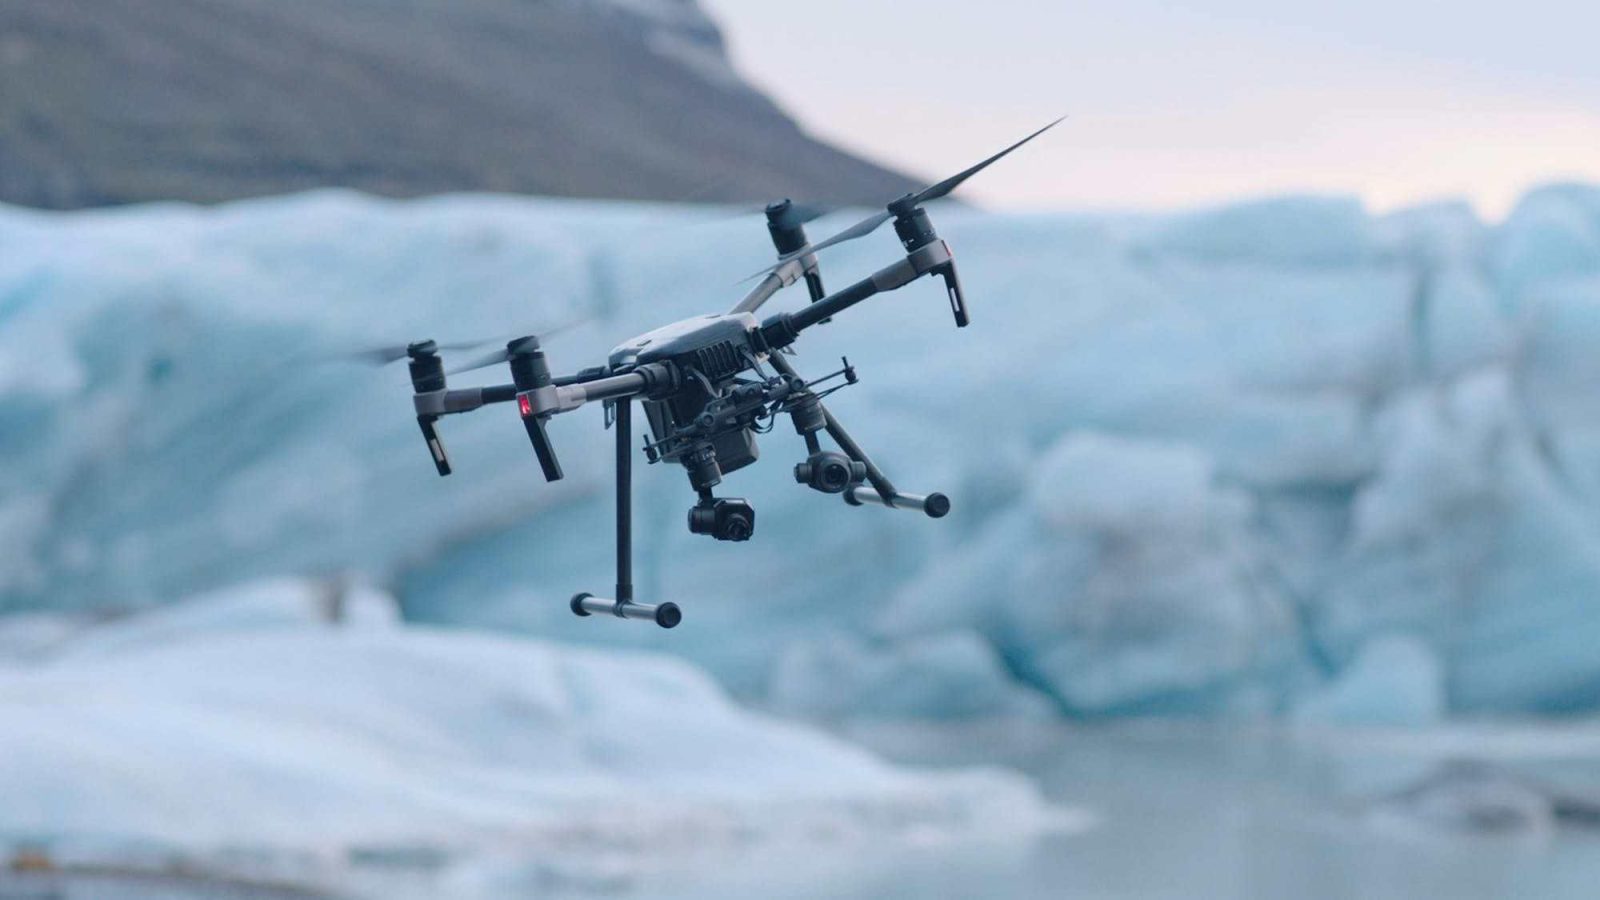 DJI responds to reports of Matrice 200 drones falling out of the sky - battery problem